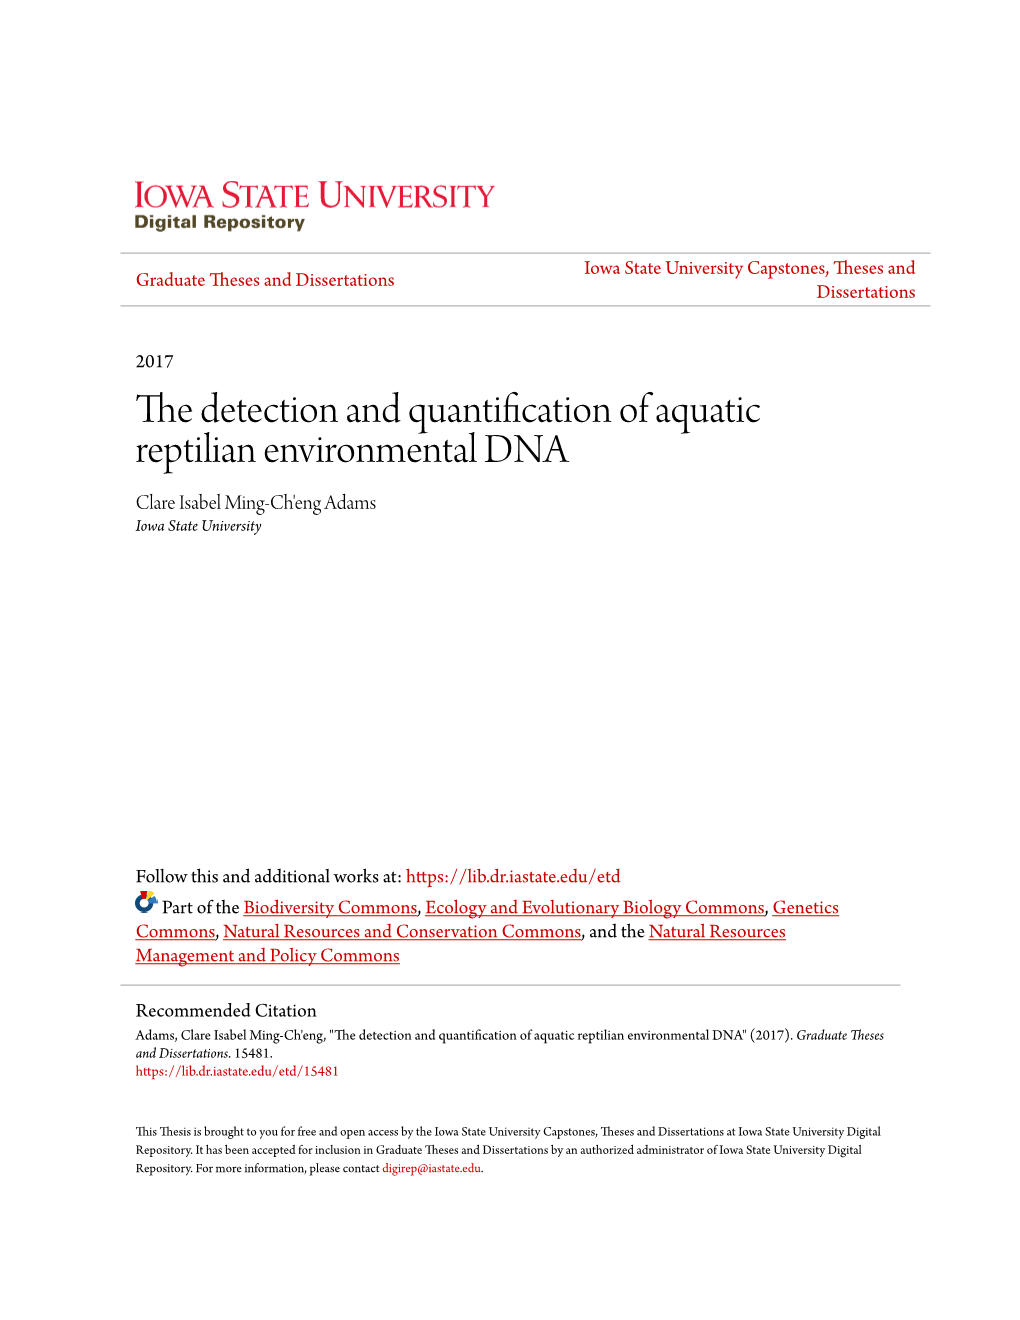 The Detection and Quantification of Aquatic Reptilian Environmental DNA Clare Isabel Ming-Ch'eng Adams Iowa State University